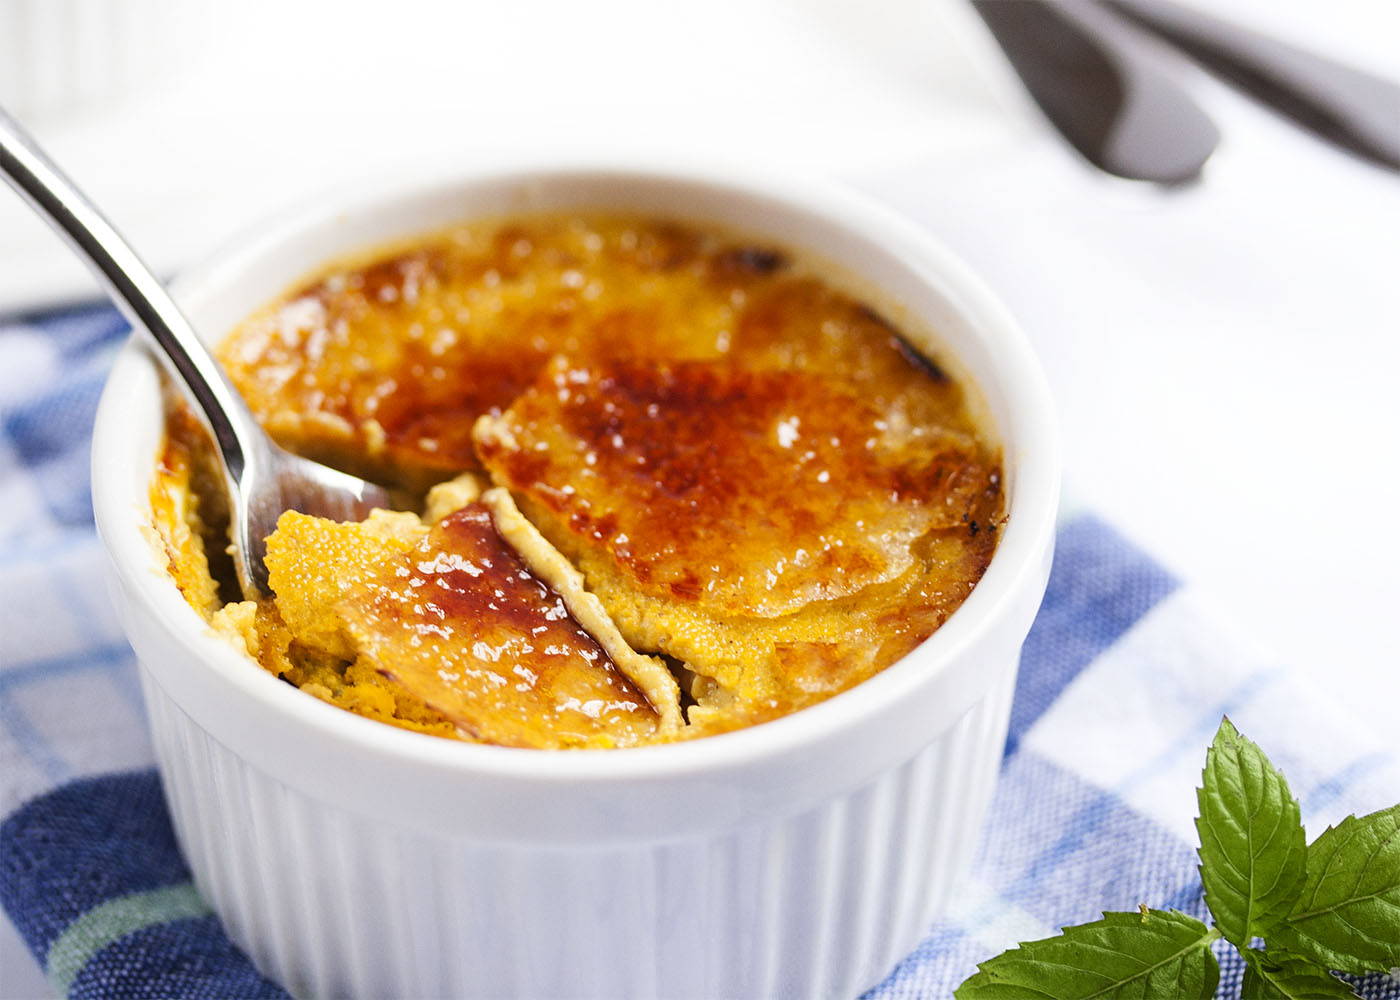 Sunshine Squash Creme Brulee - Caramelized sugar topping and a yummy, squash custard makes for a dish that is creamy, comforting and a great way to make something different with winter squash. | justalittlebitofbacon.com